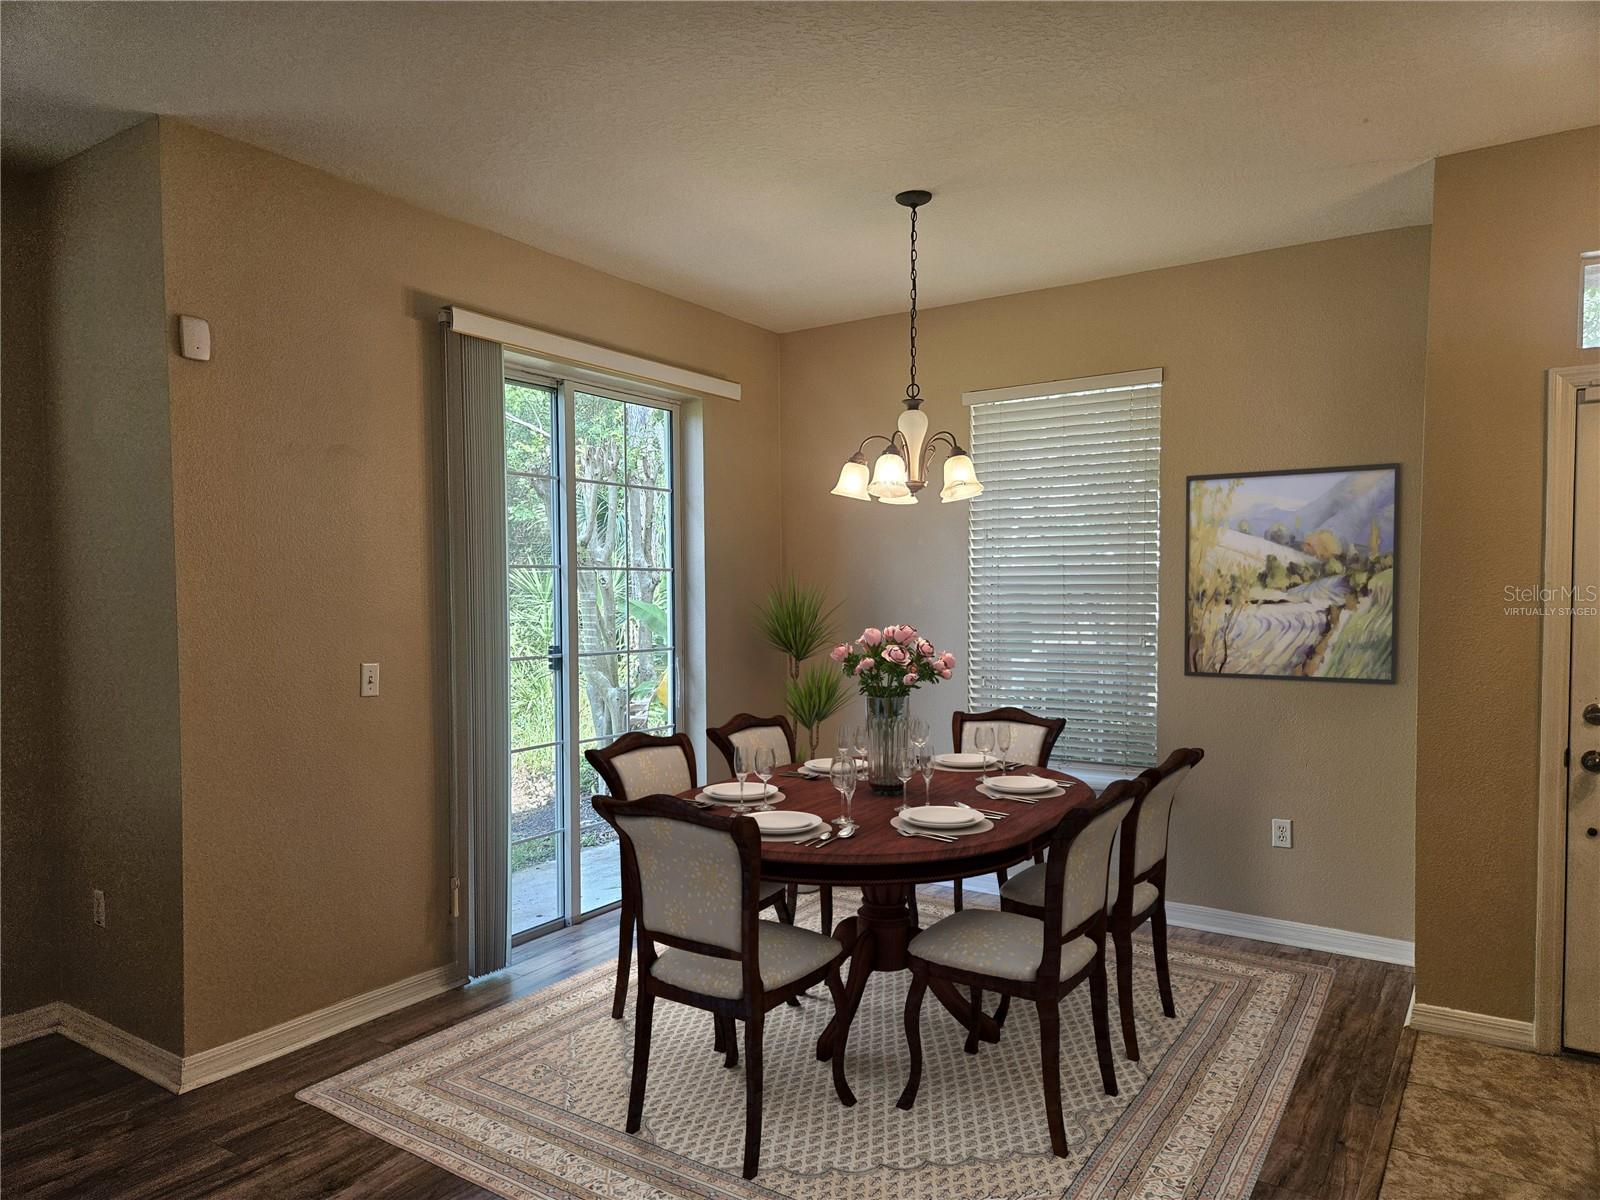 VIRTUALLY STAGED Dining Room Area